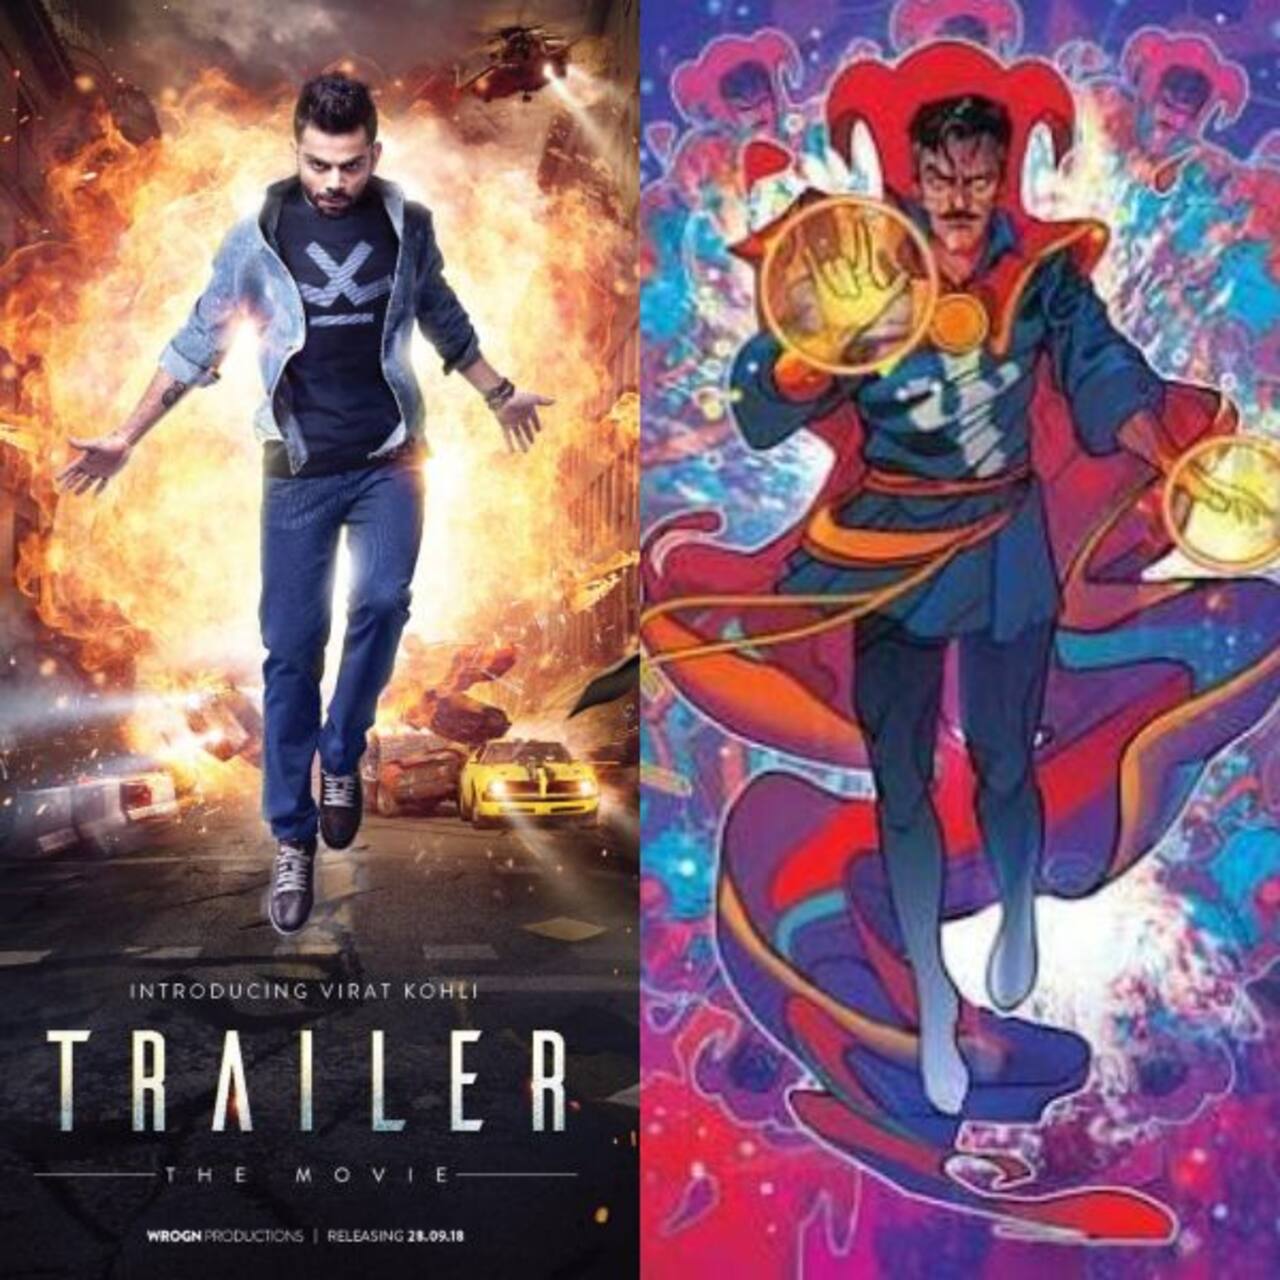 Virat Kohli's latest poster looks inspired by Dr Strange - view pics -  Bollywood News & Gossip, Movie Reviews, Trailers & Videos at  